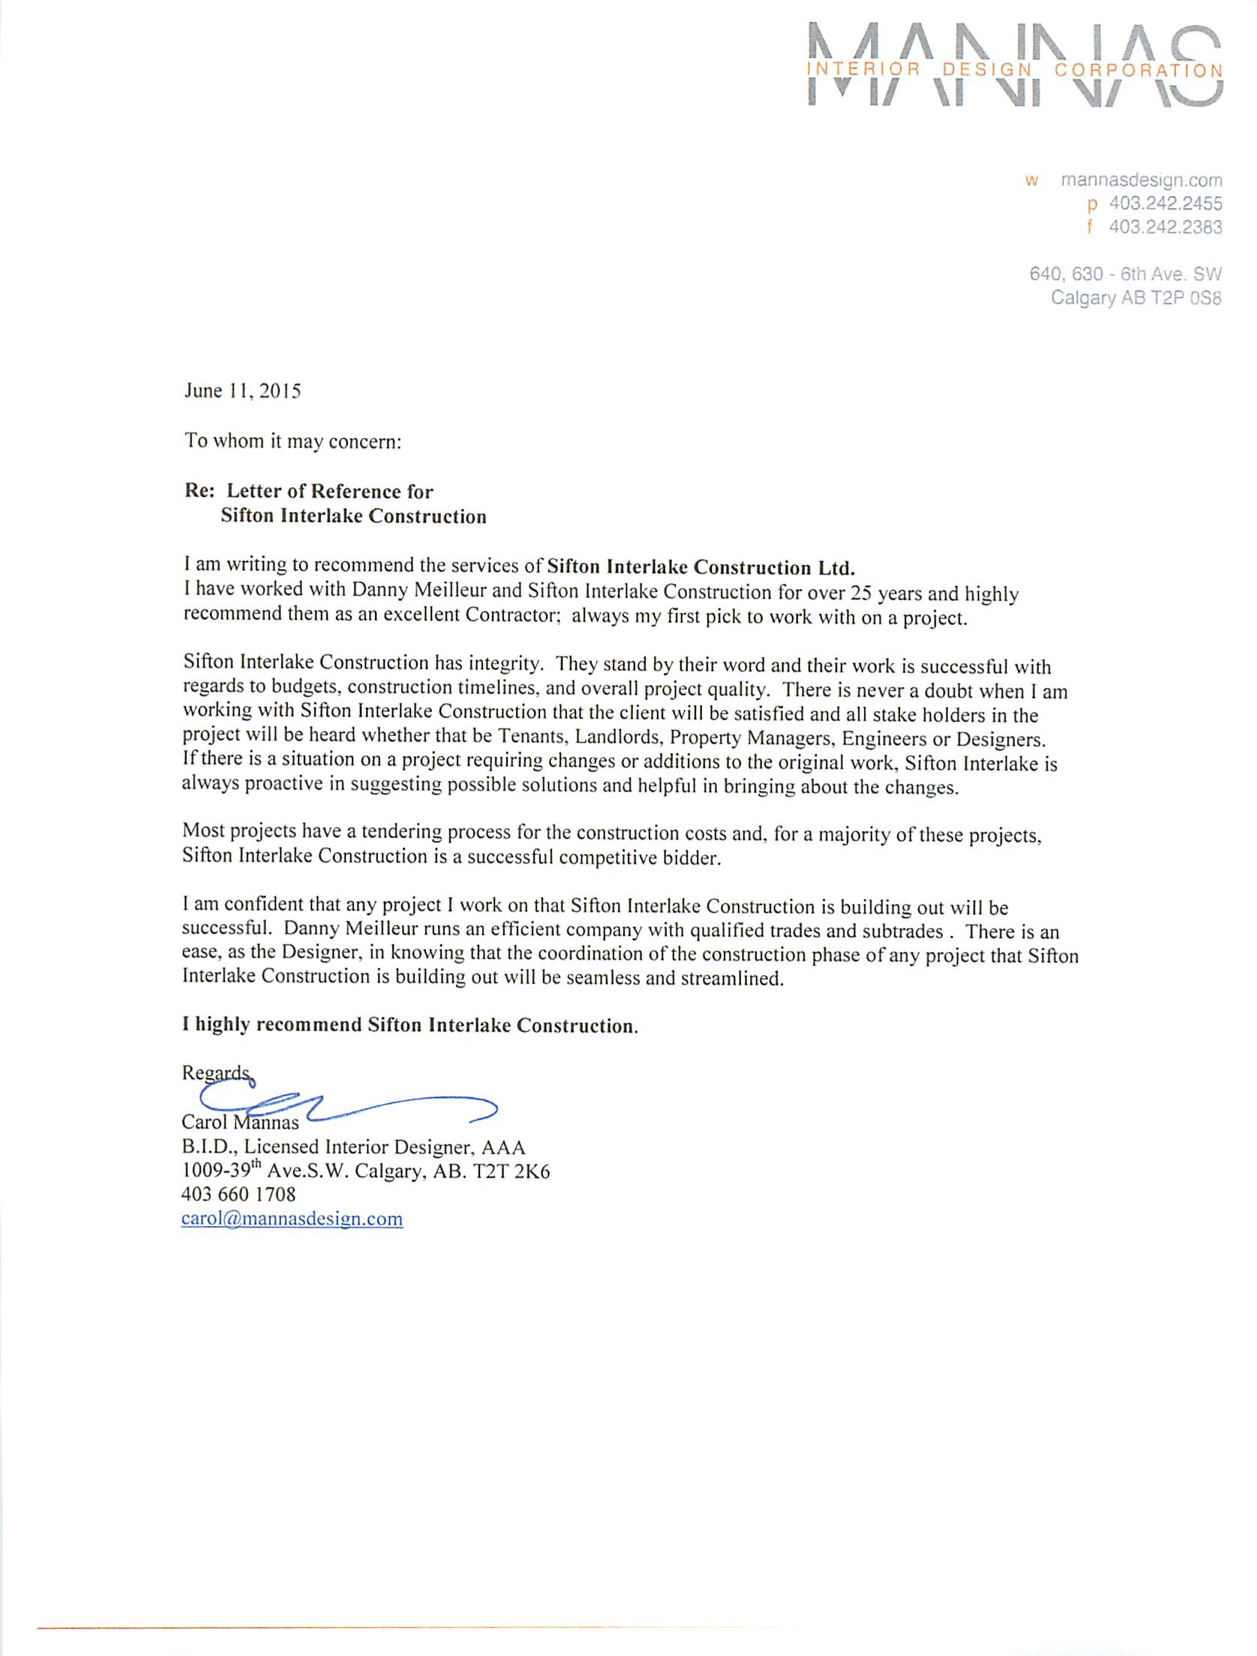 Reference Letter From Mannas Design 